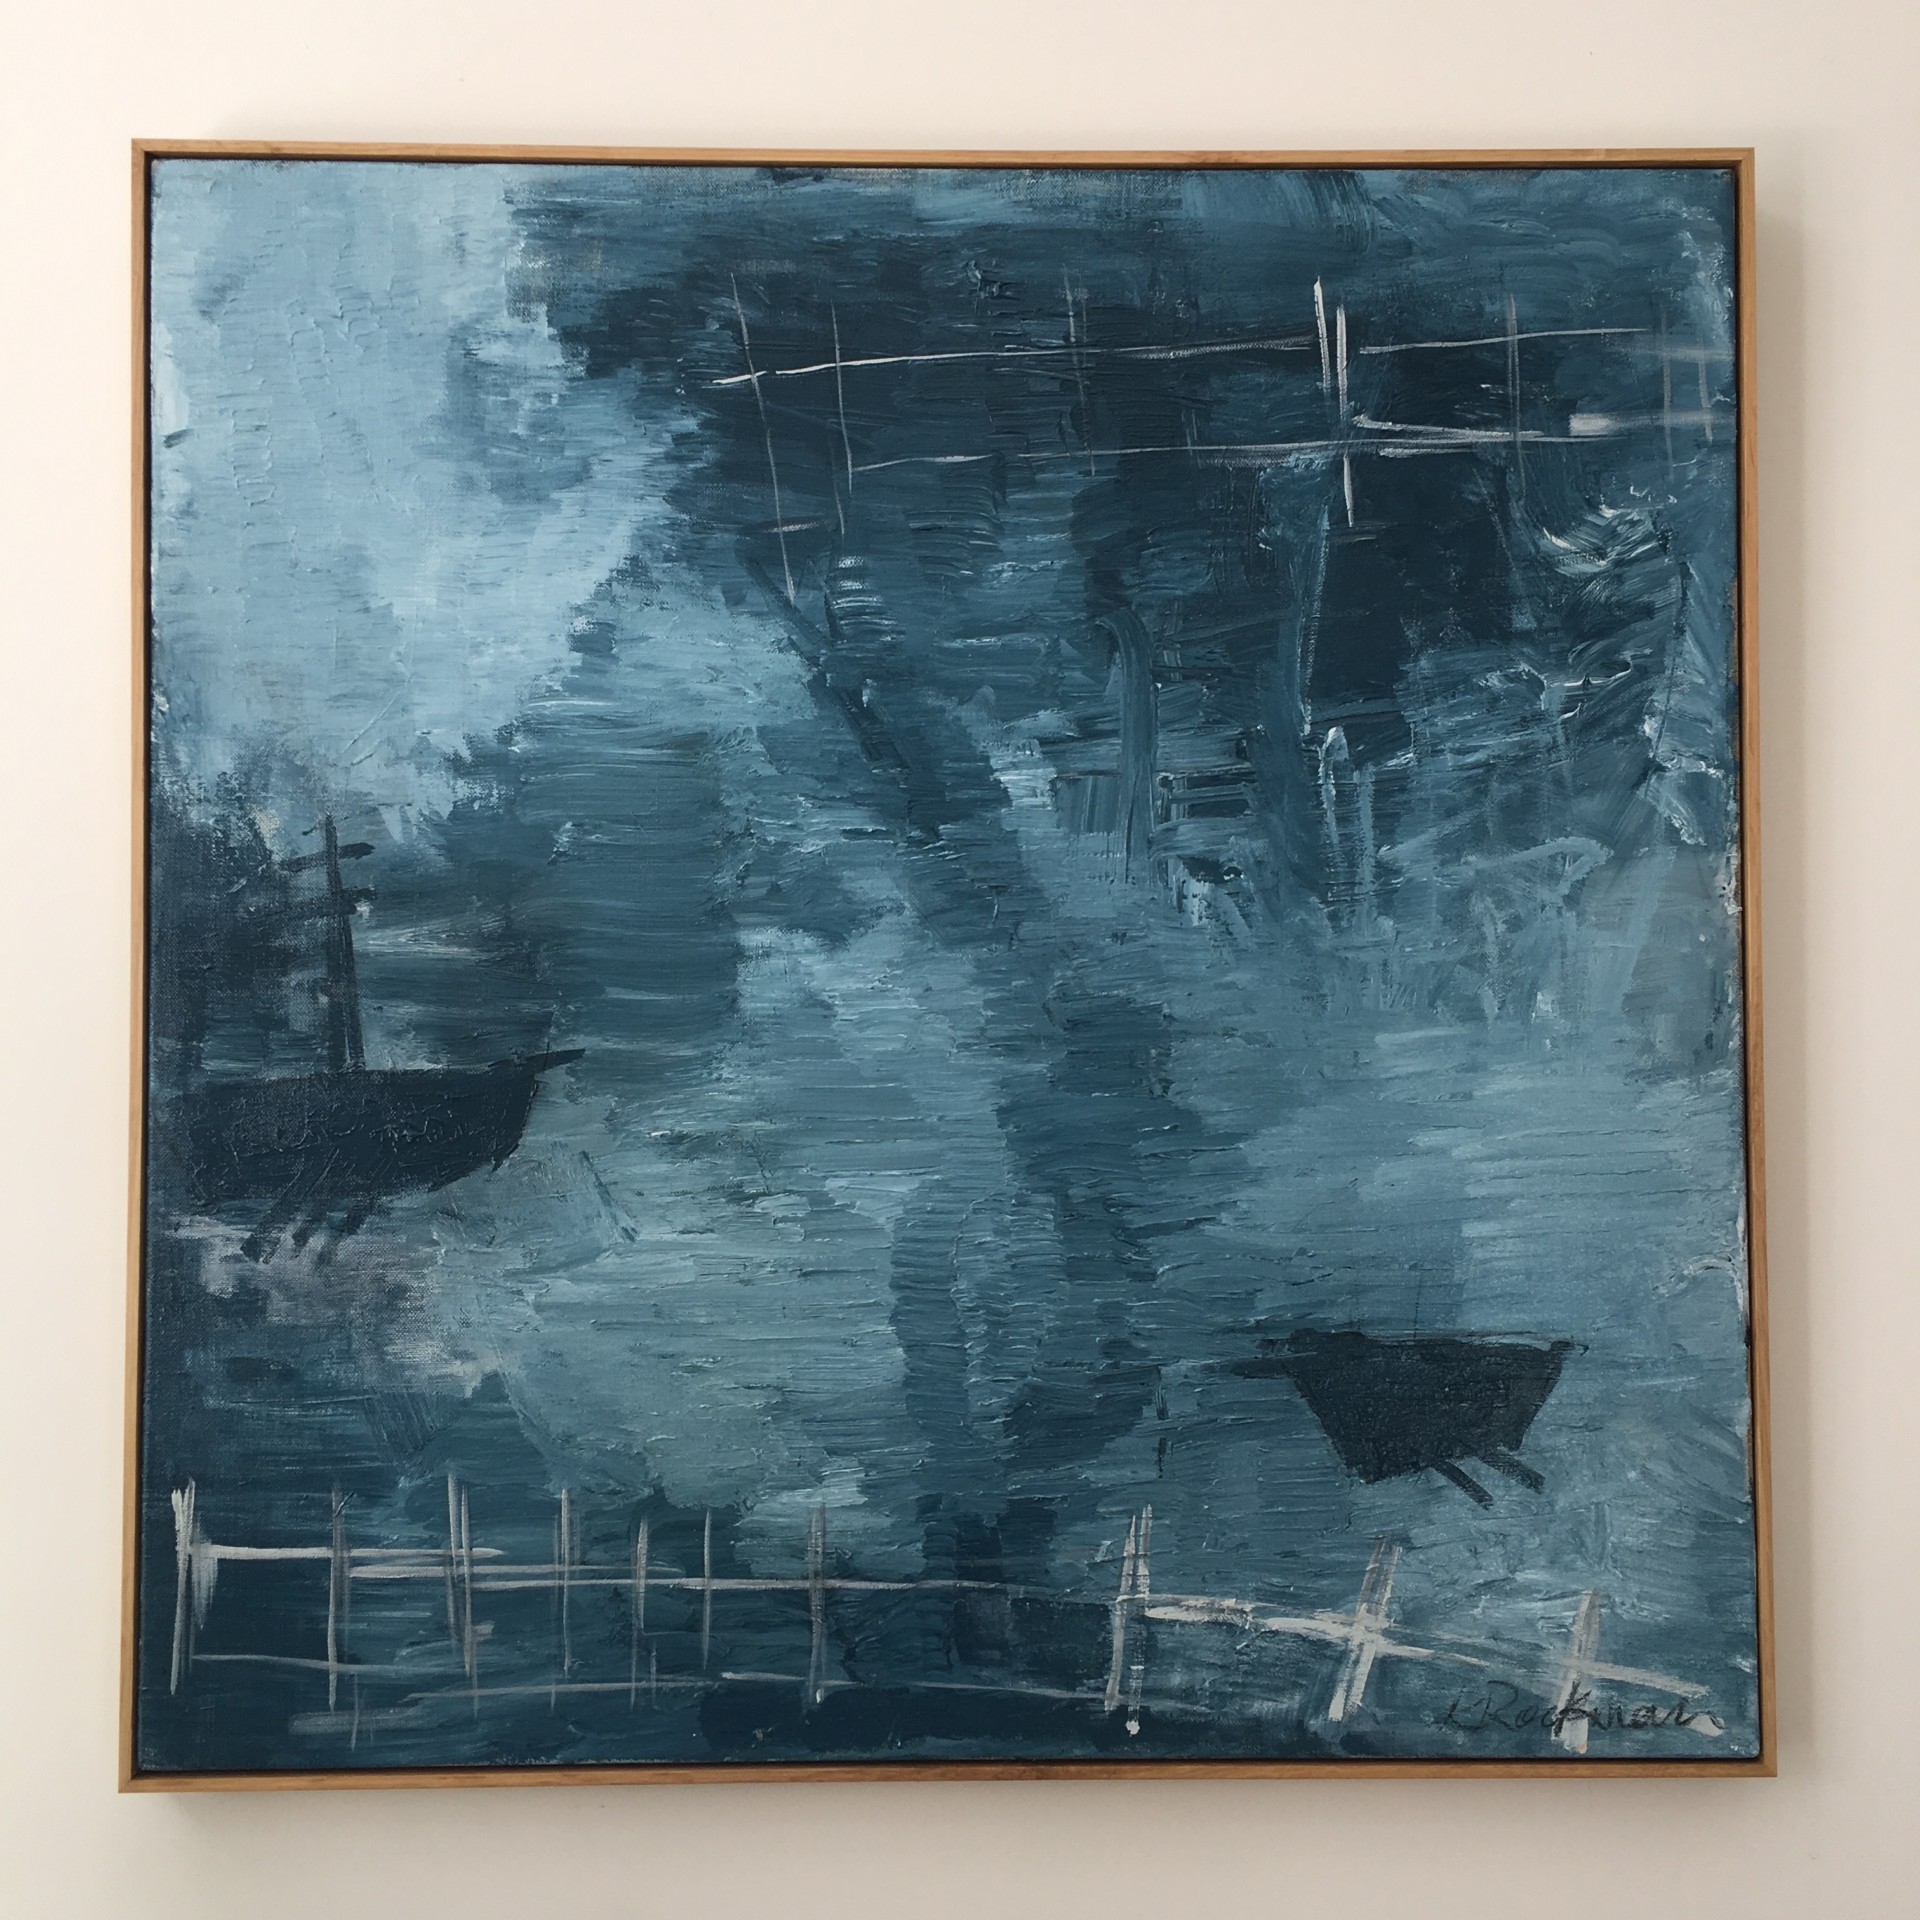 Lost at sea – acrylic on linen